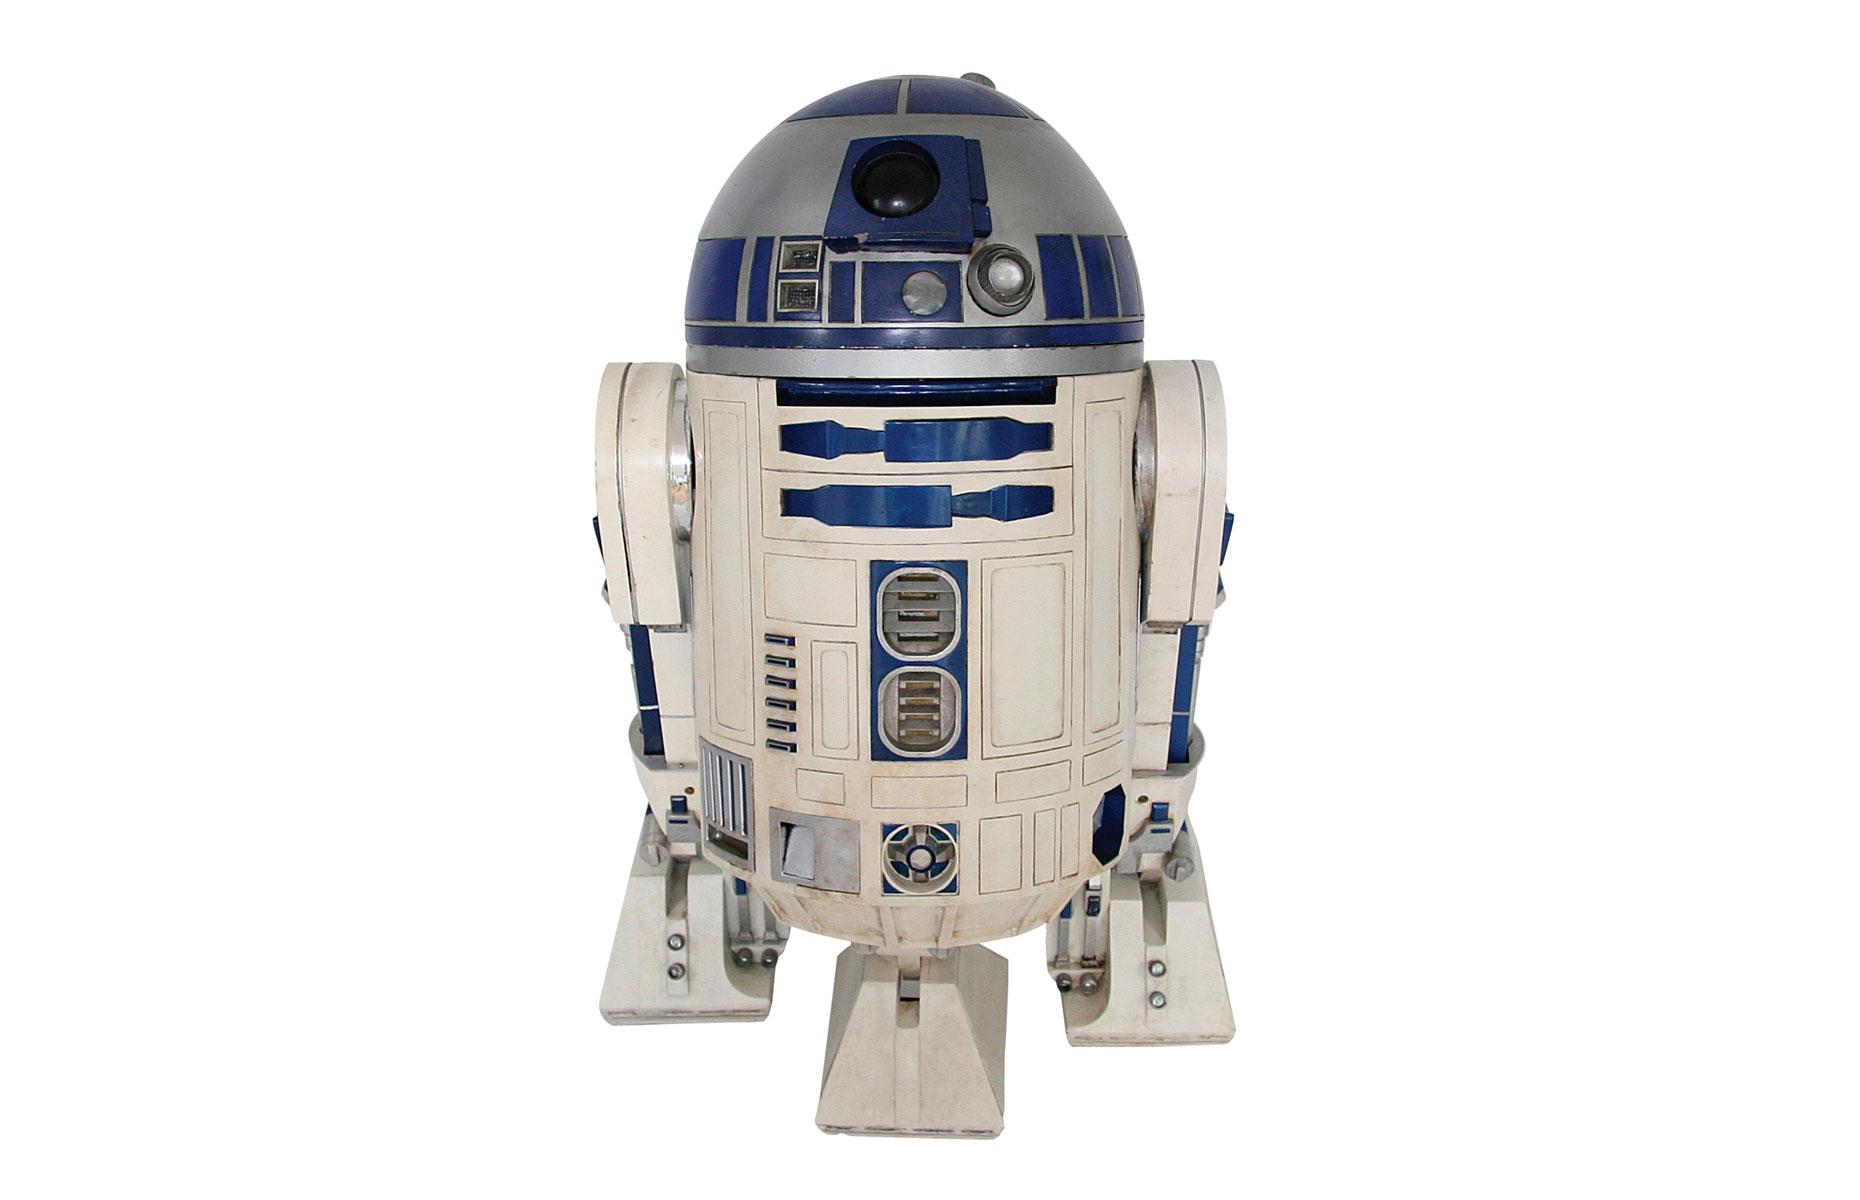 June: an R2-D2 prop used in the original Star Wars trilogy sells for a record $2.8 million (£2.1m)